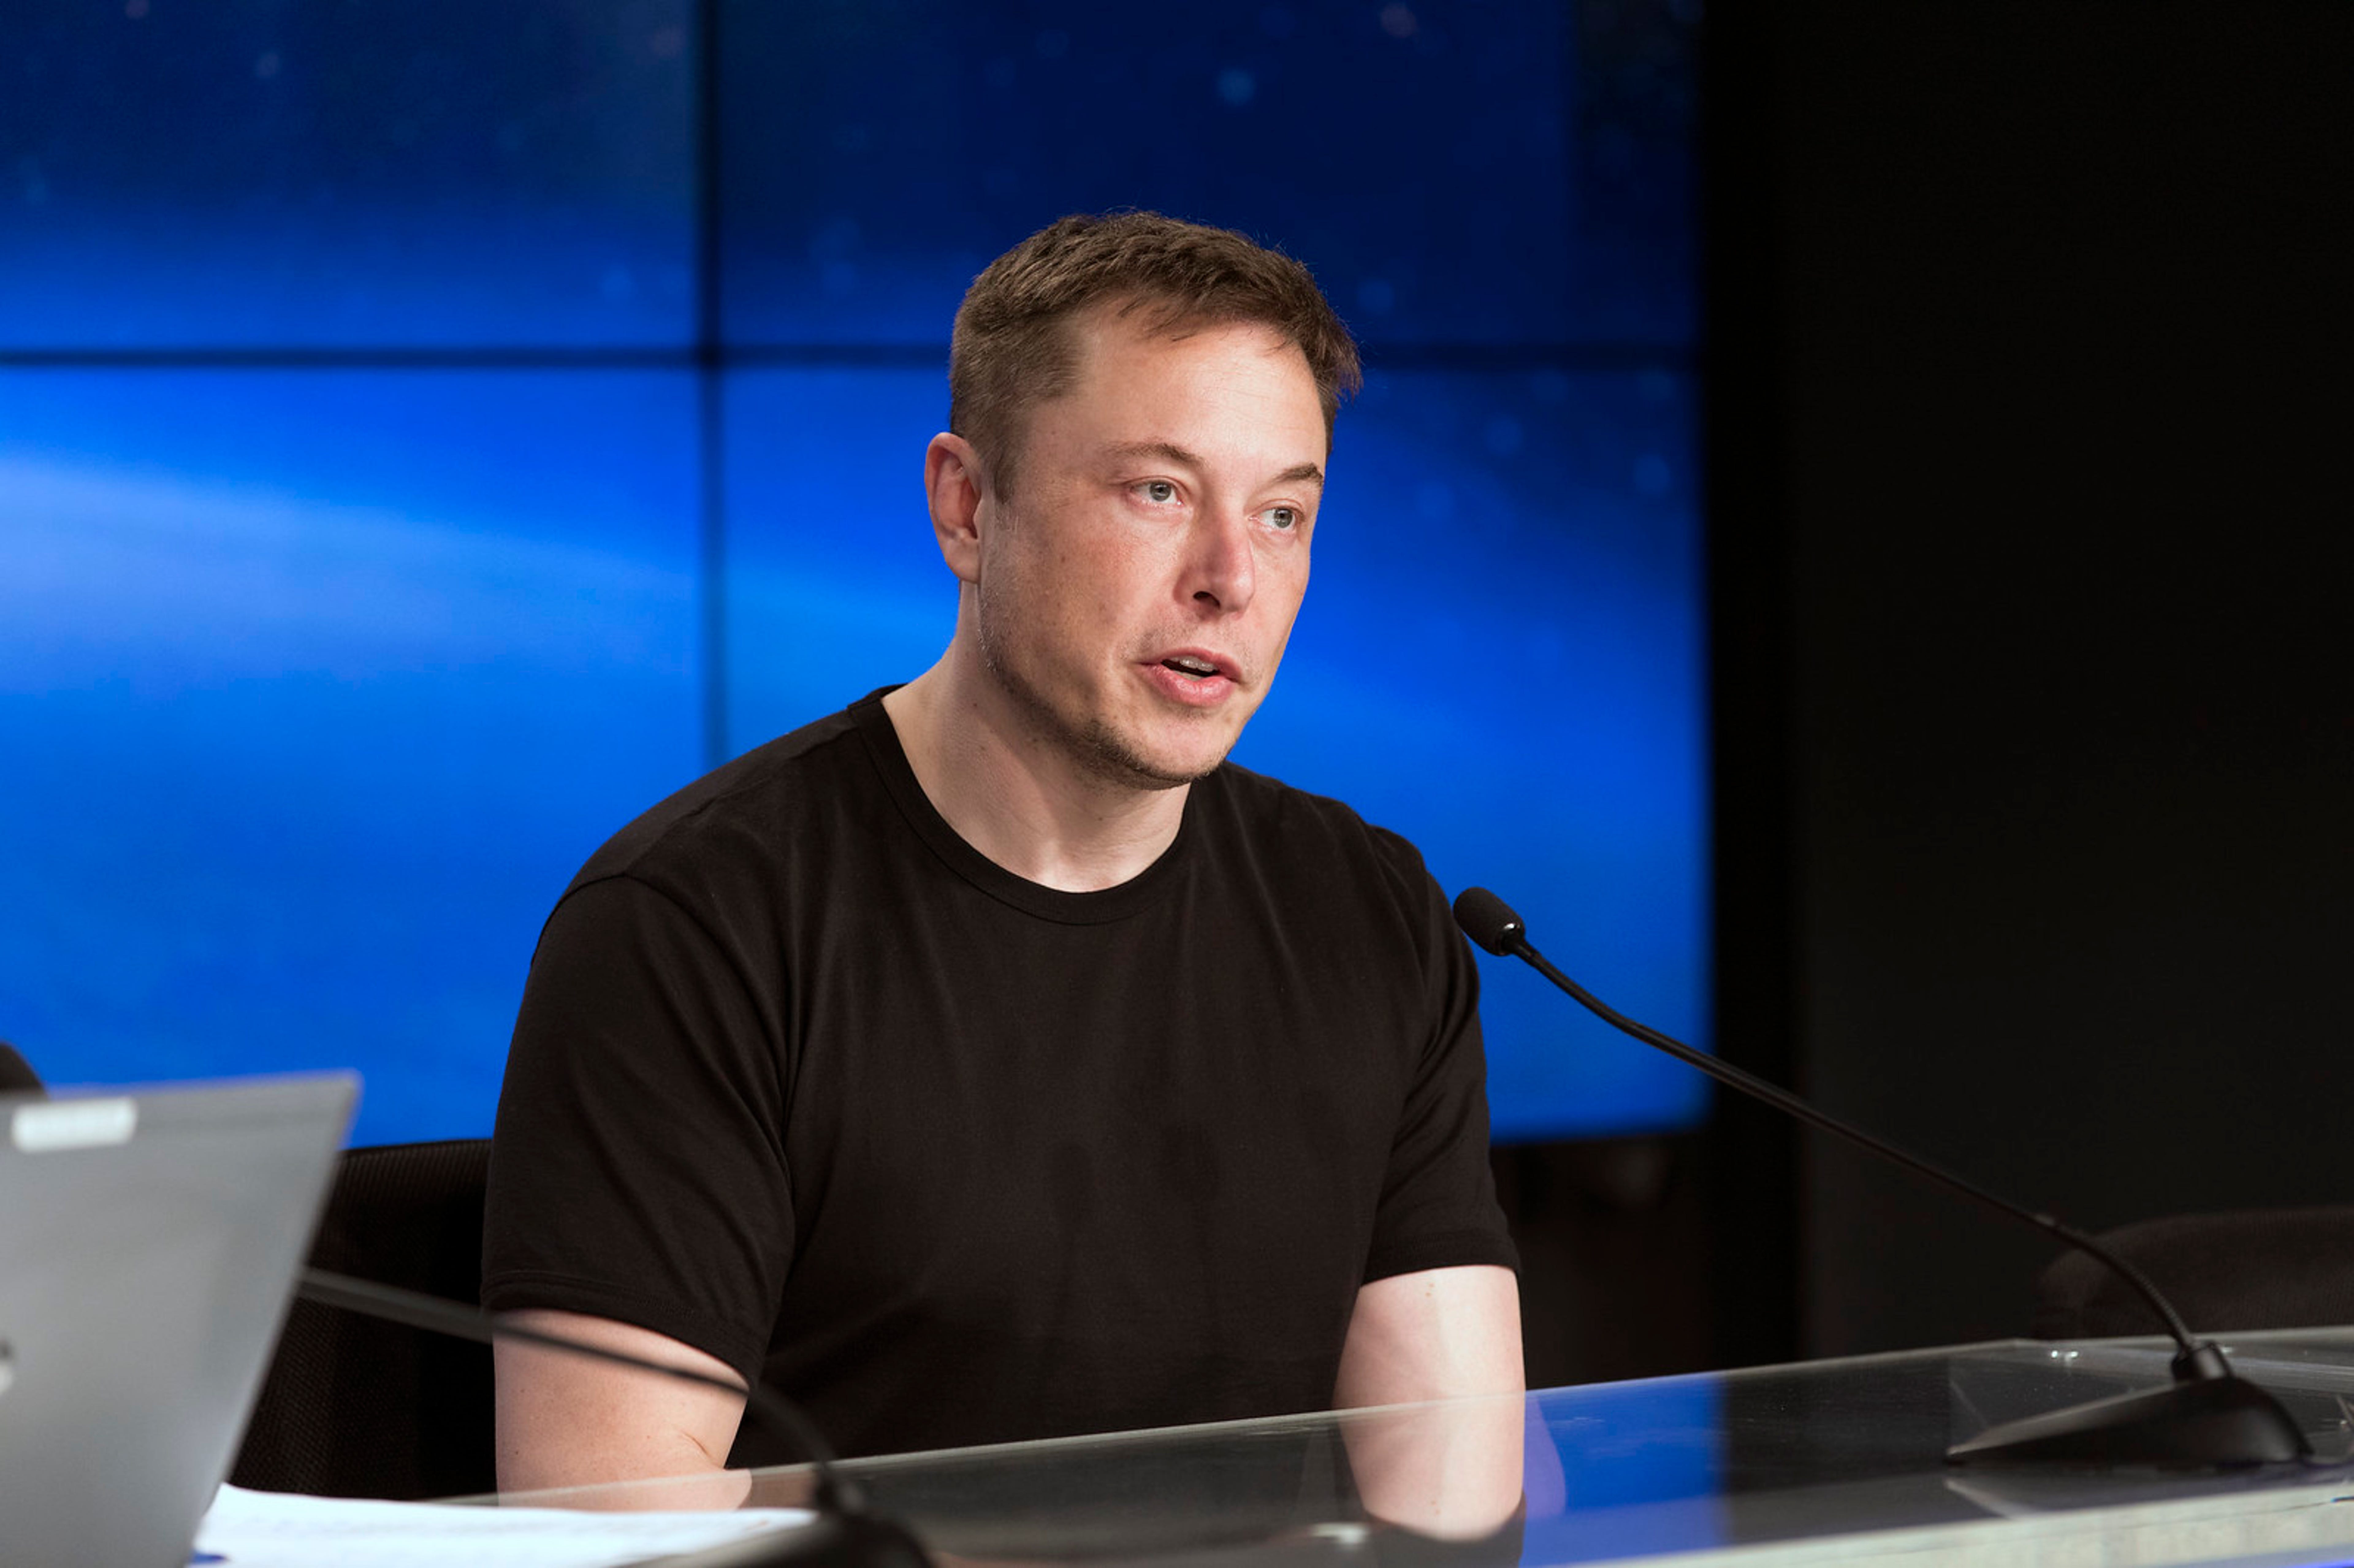 Elon Musk Looks To Tie Up Less Of His Own Wealth Into Twitter Deal: Analyst Sees Tesla Stock Getting A Boost If This Materializes